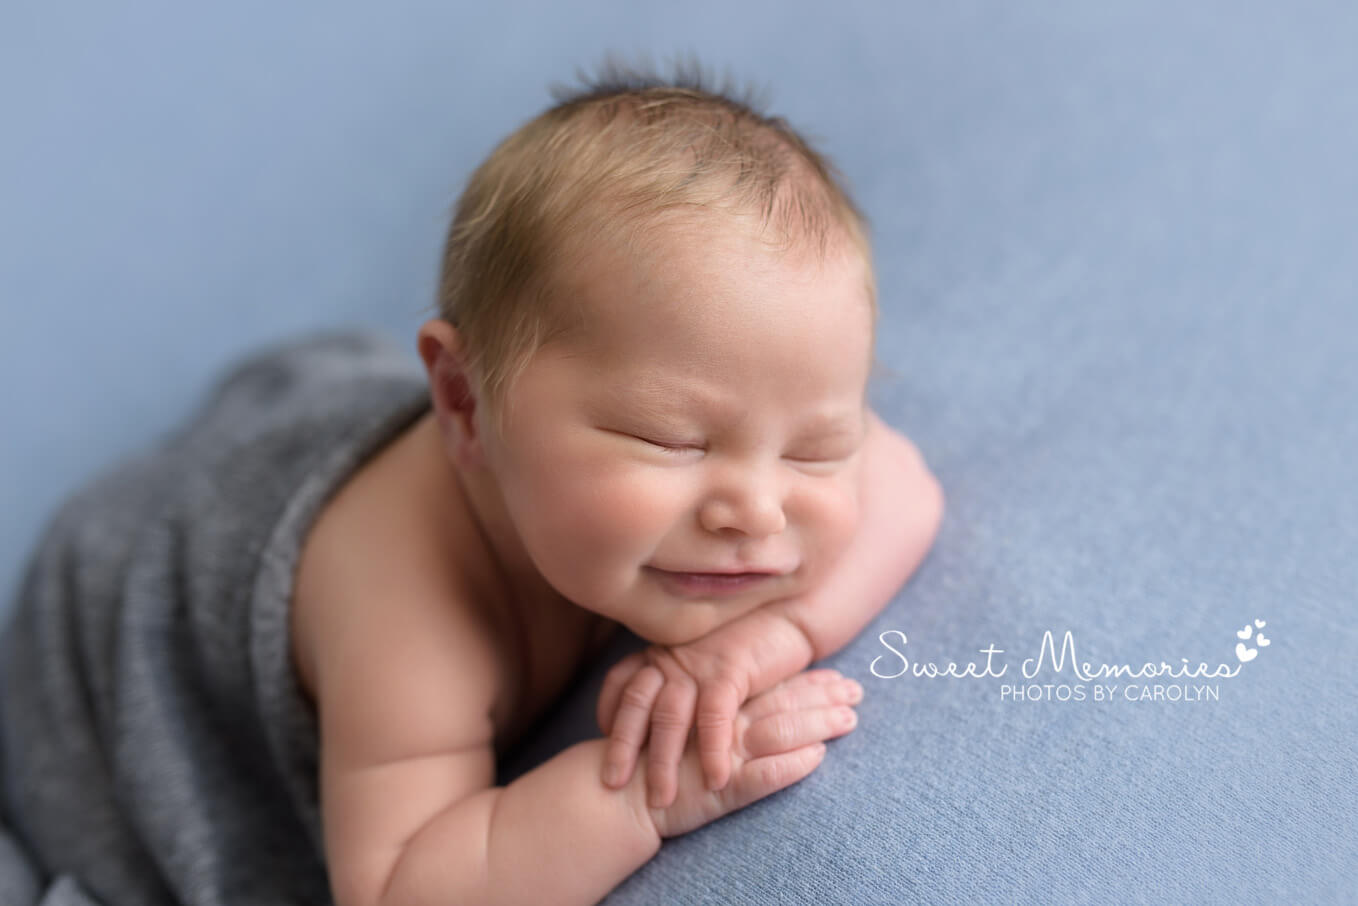 baby boy sleeping and smiling on blue blanket